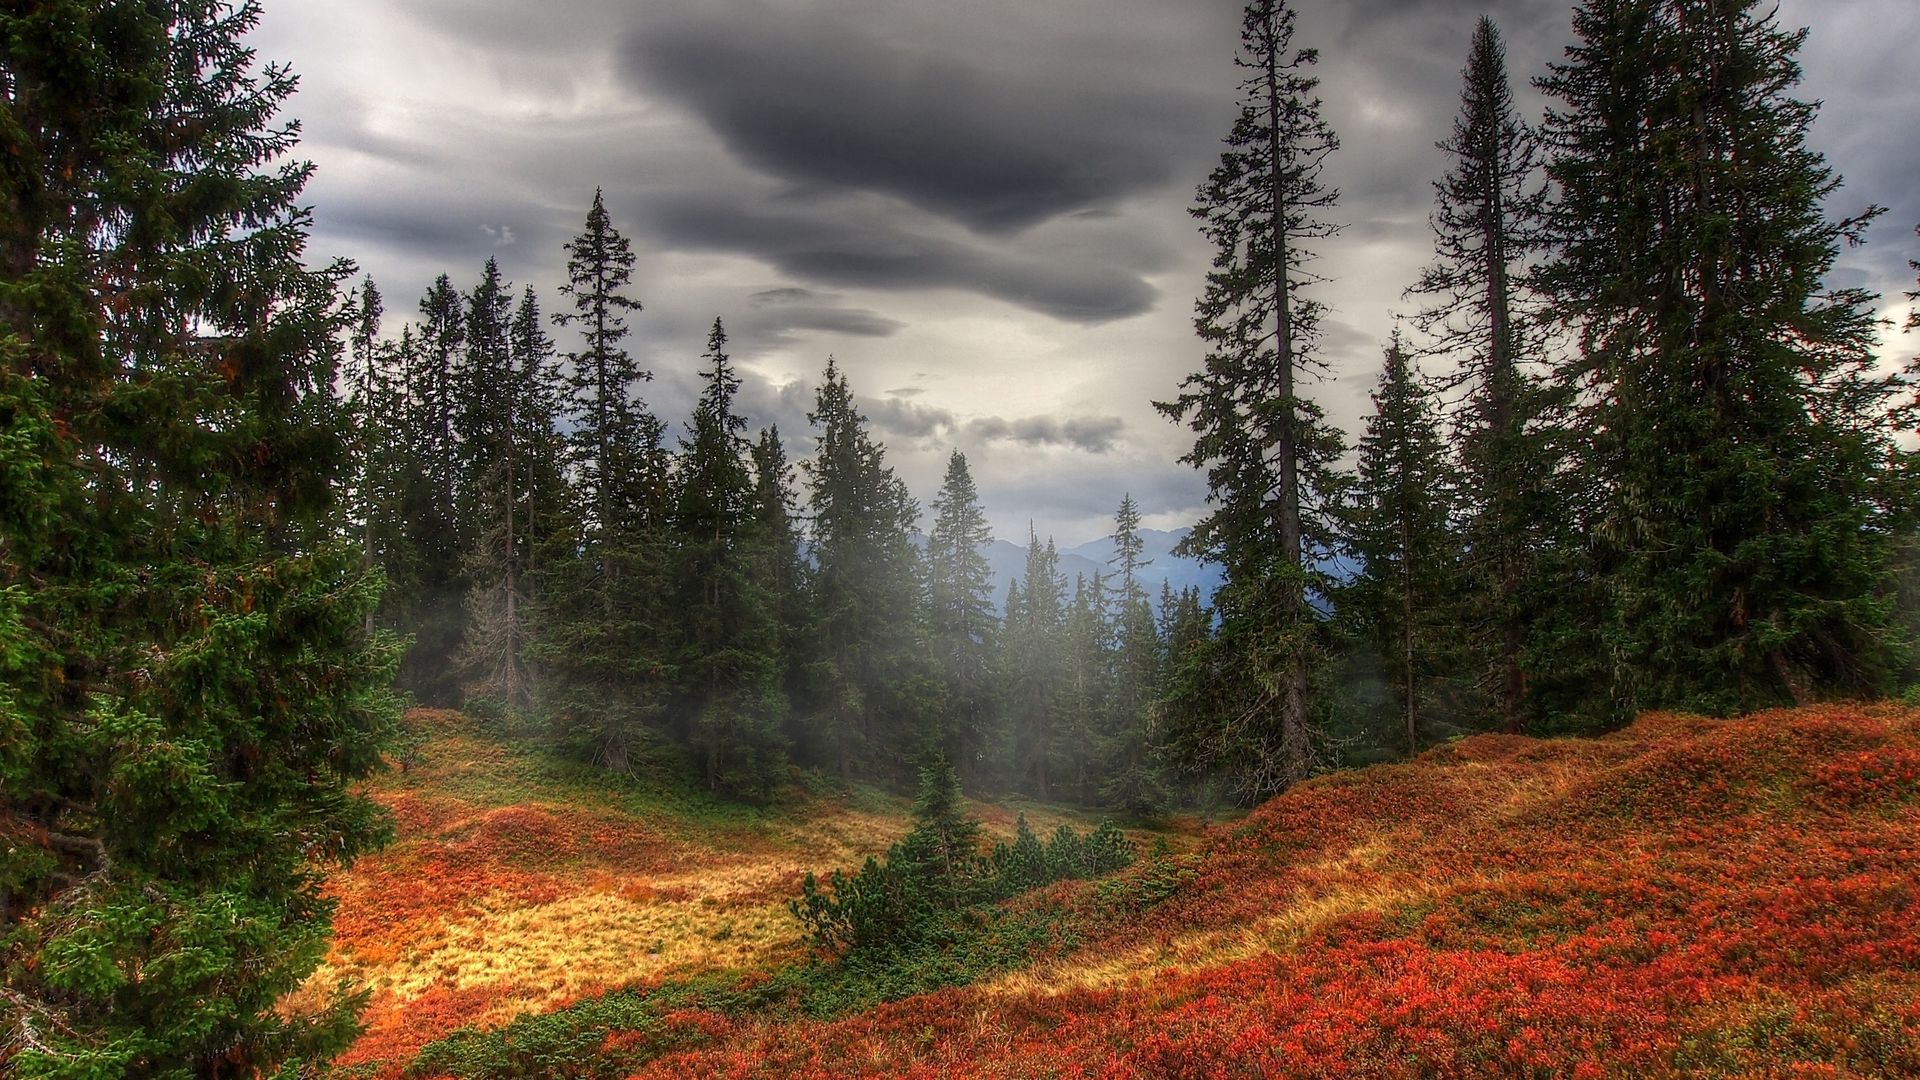 Download wallpaper 1920x1080 autumn, fog, trees, forest full hd, hdtv, fhd, 1080p HD background